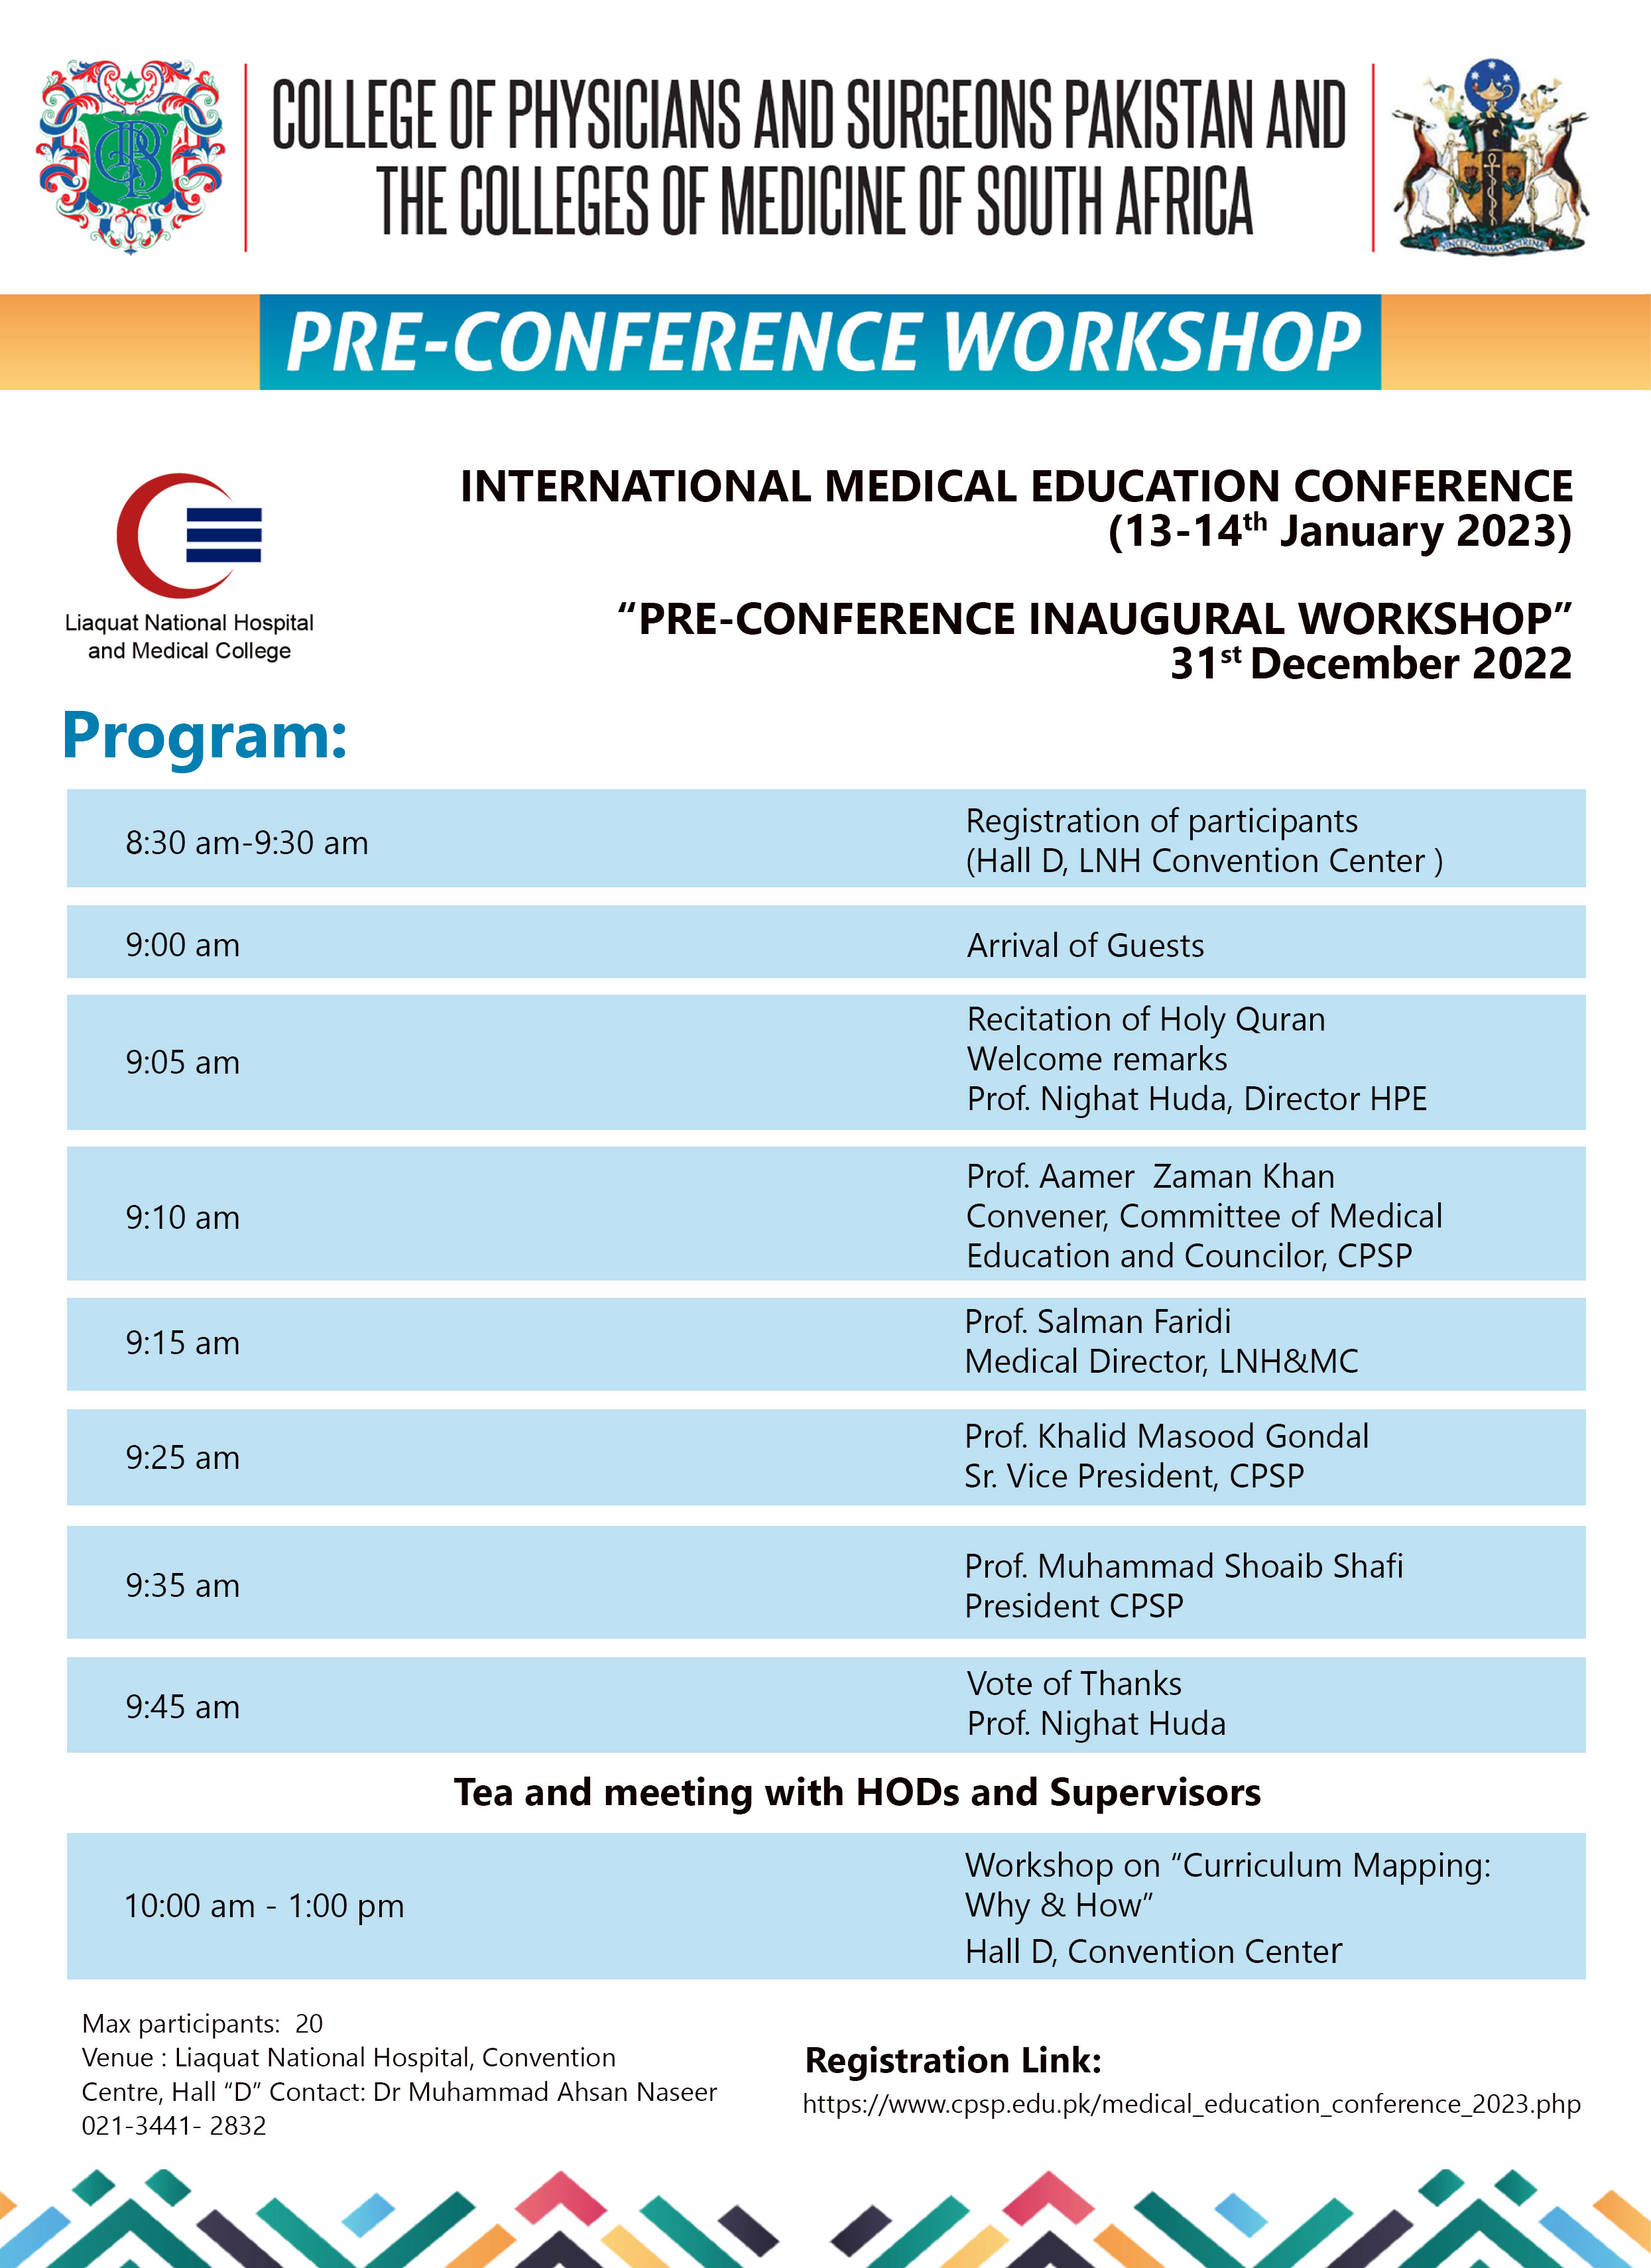 Pre-conference Inaugural Workshop- Curriculum Mapping: Why and How